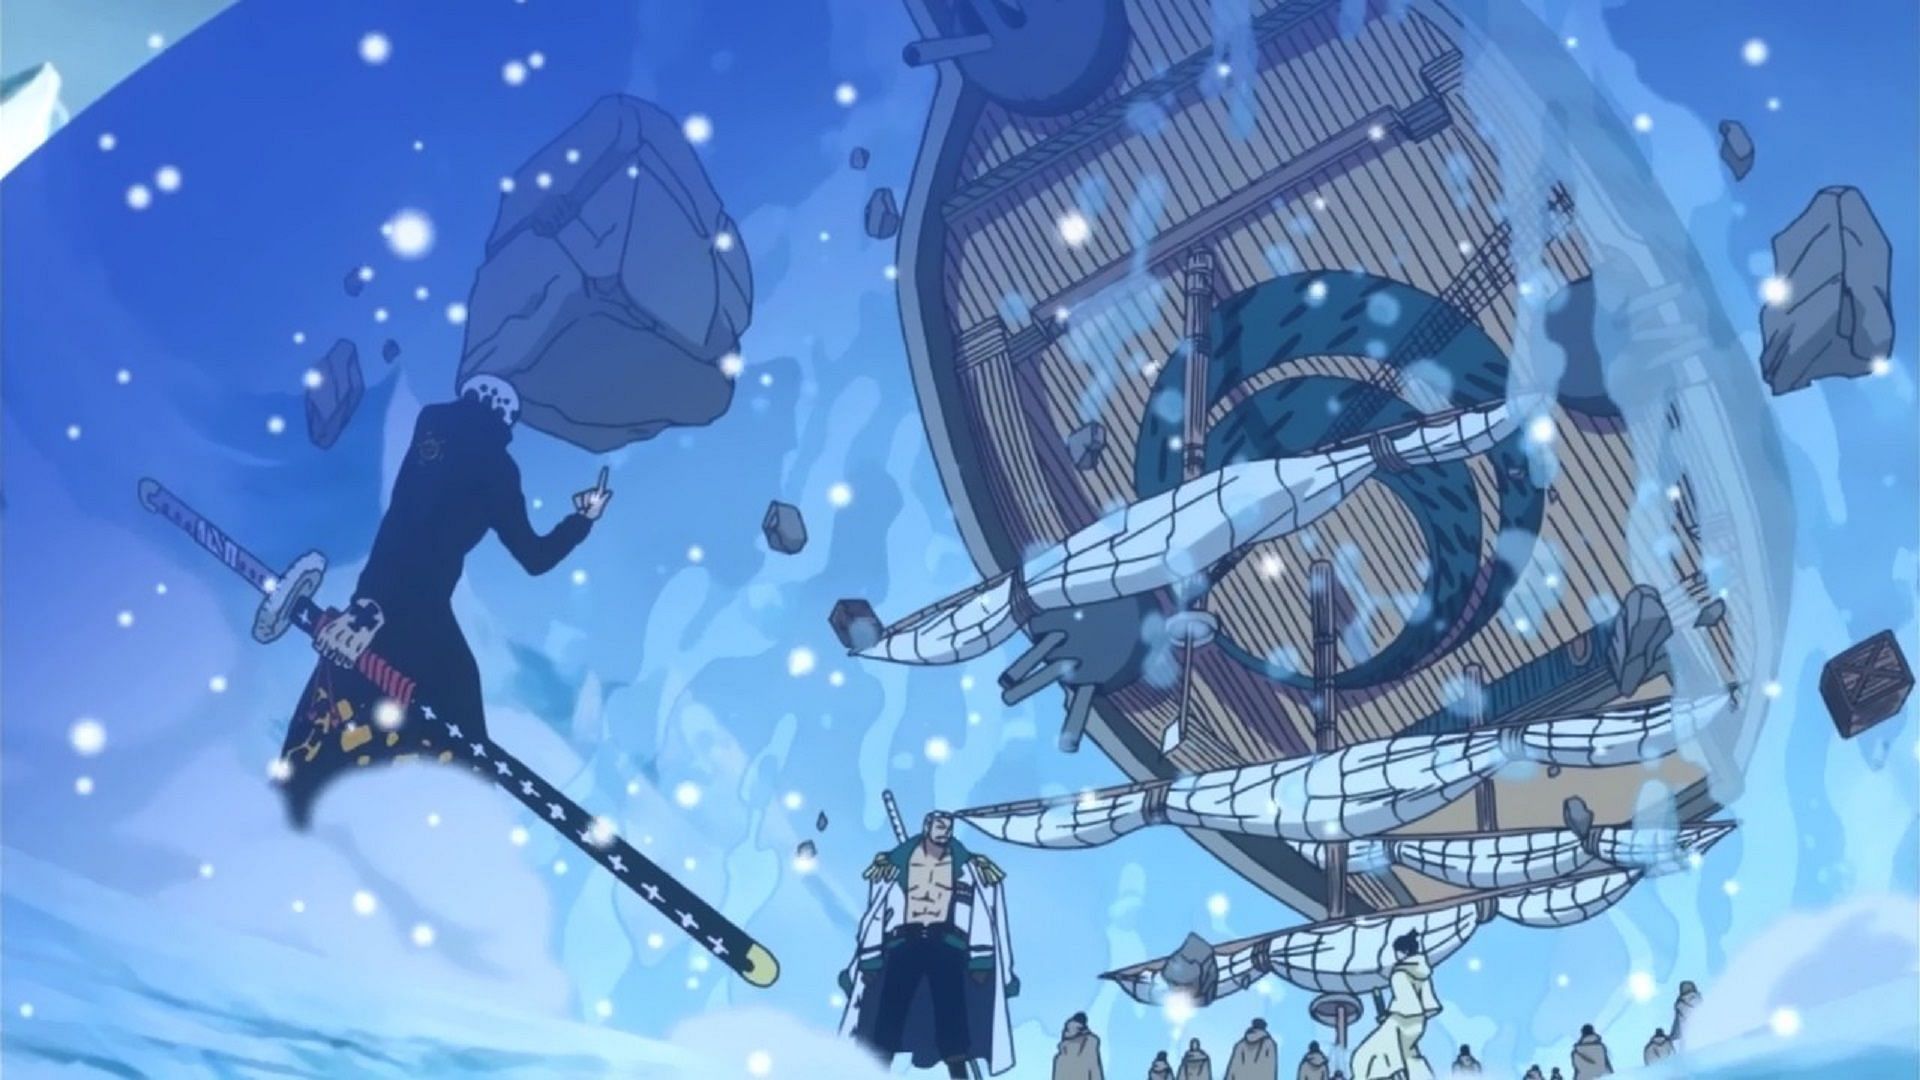 Within the range of his Ope-Ope powers, Law can do crazy things (Image via Toei Animation, One Piece)